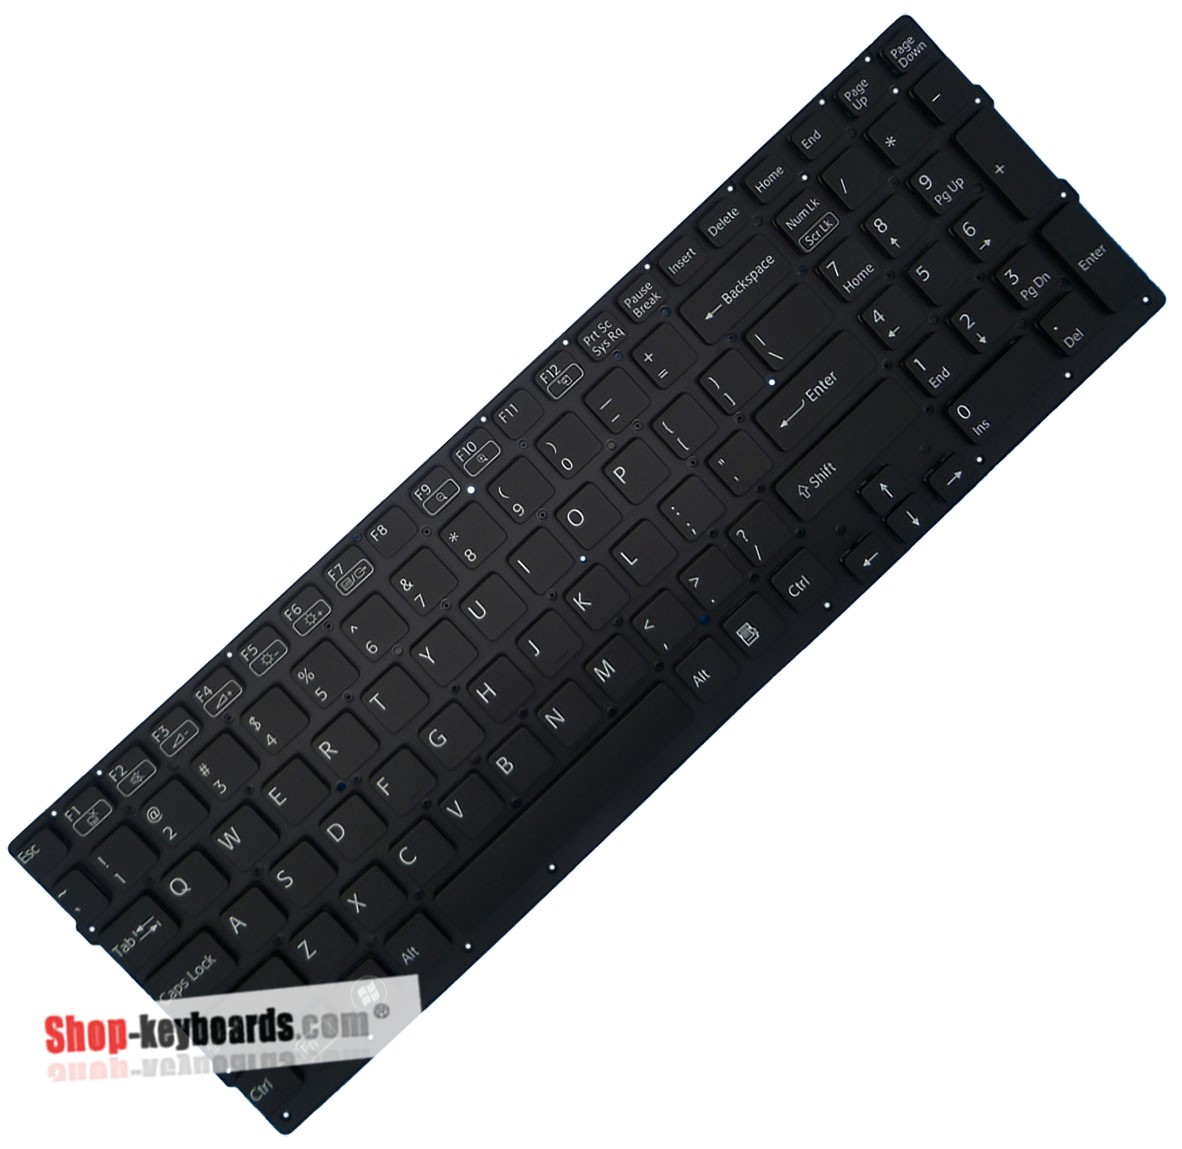 Sony VAIO PCG-71713L Keyboard replacement